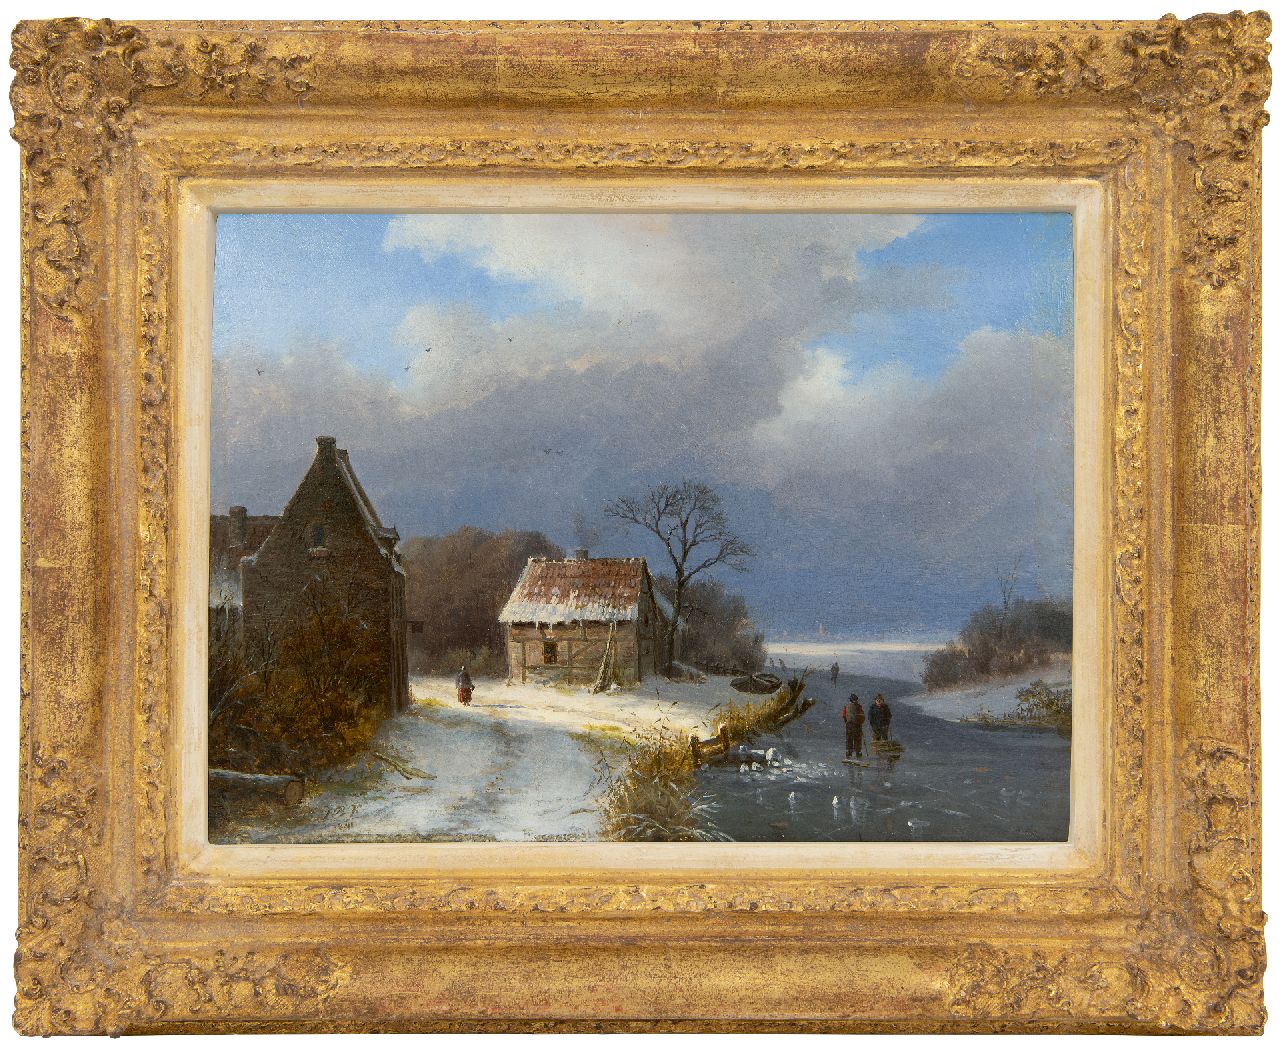 Klombeck J.B.  | Johann Bernard Klombeck | Paintings offered for sale | Winter landscape with skaters and wood gatherer, oil on panel 22.9 x 31.3 cm, signed l.l. with initials and dated 1841